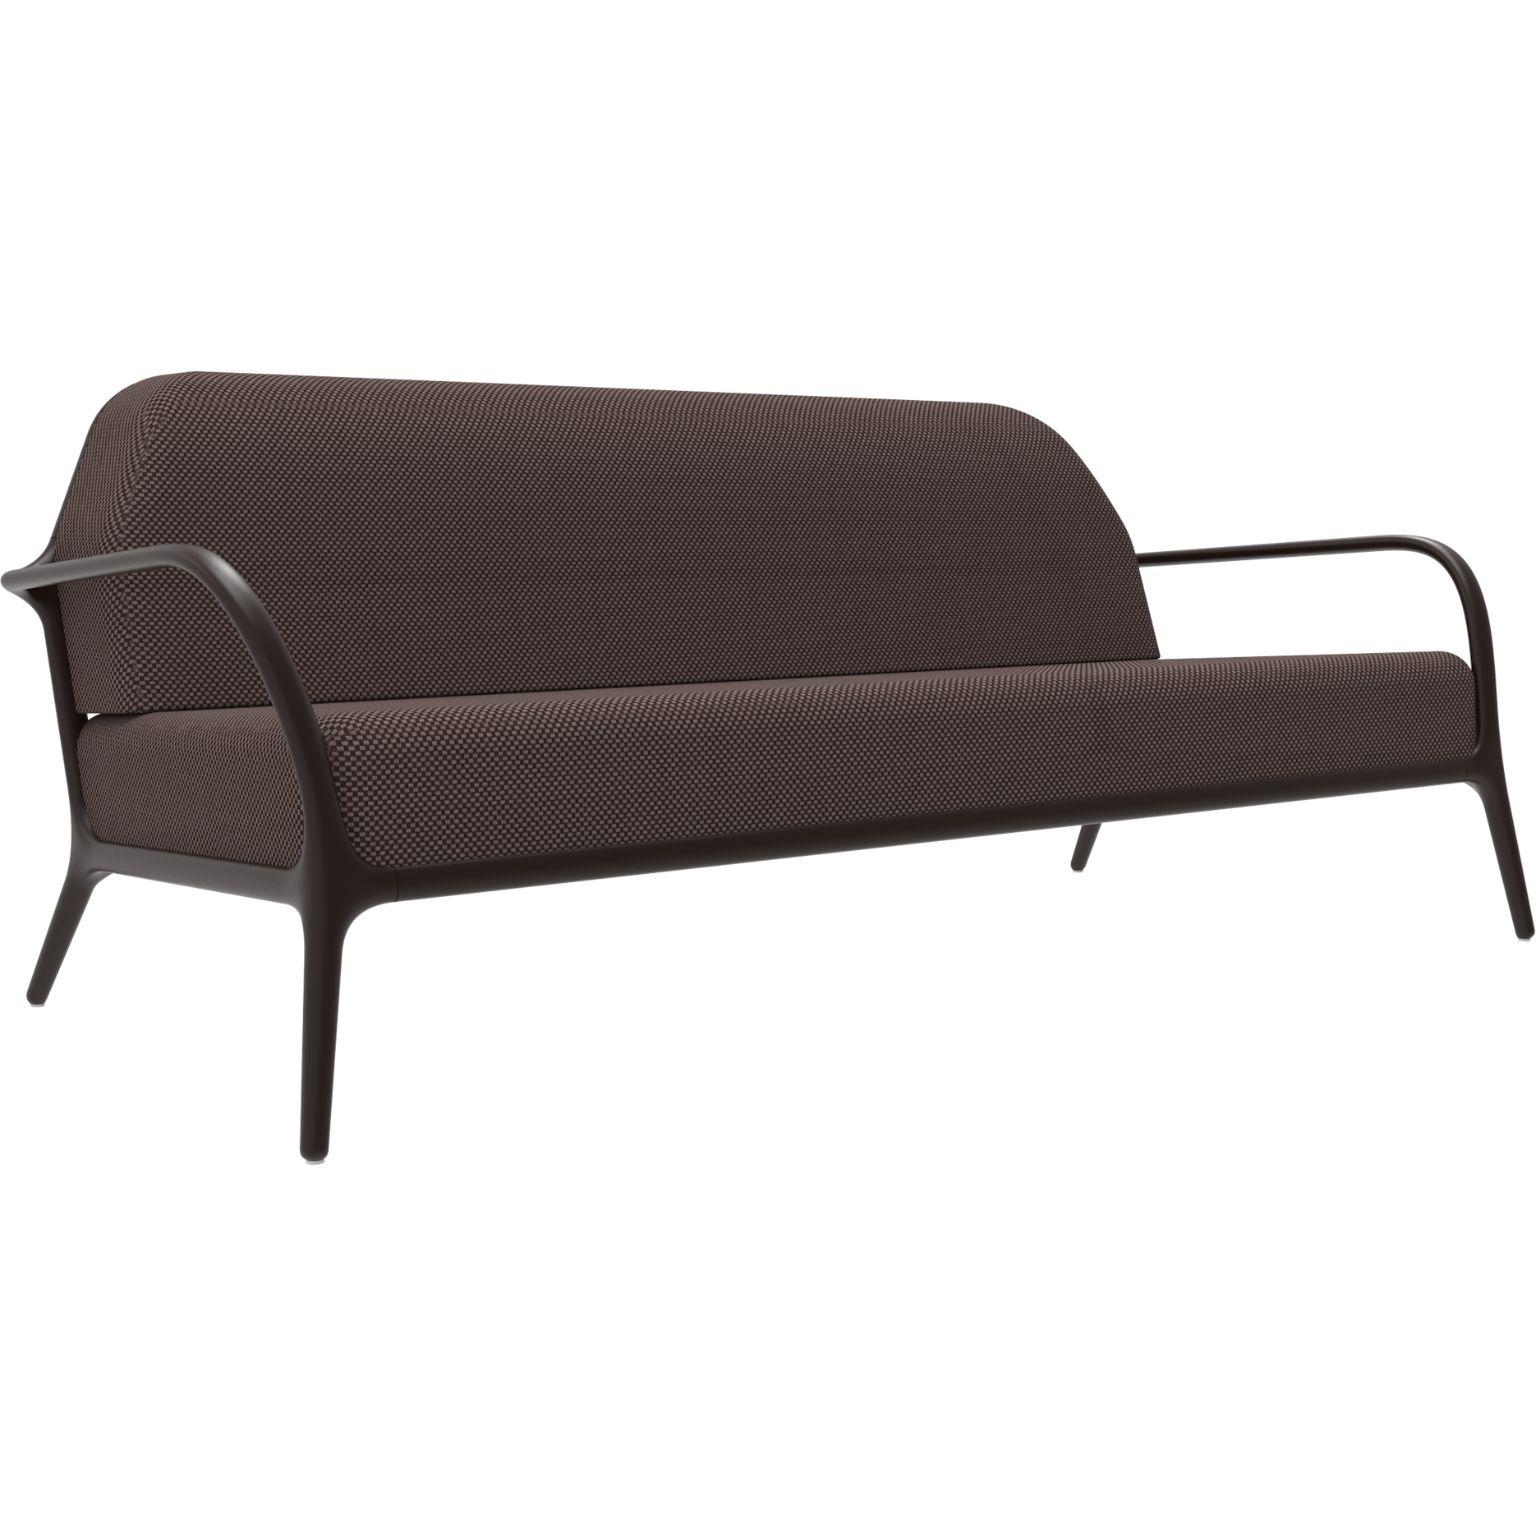 Xaloc chocolate sofa by Mowee
Dimensions: D 100 x W 200 x H 81 cm (Seat Height 42 cm)
Material: Aluminium, Textile
Weight: 46 kg
Also available in different colours and finishes.

 Xaloc synthesizes the lines of interior furniture to